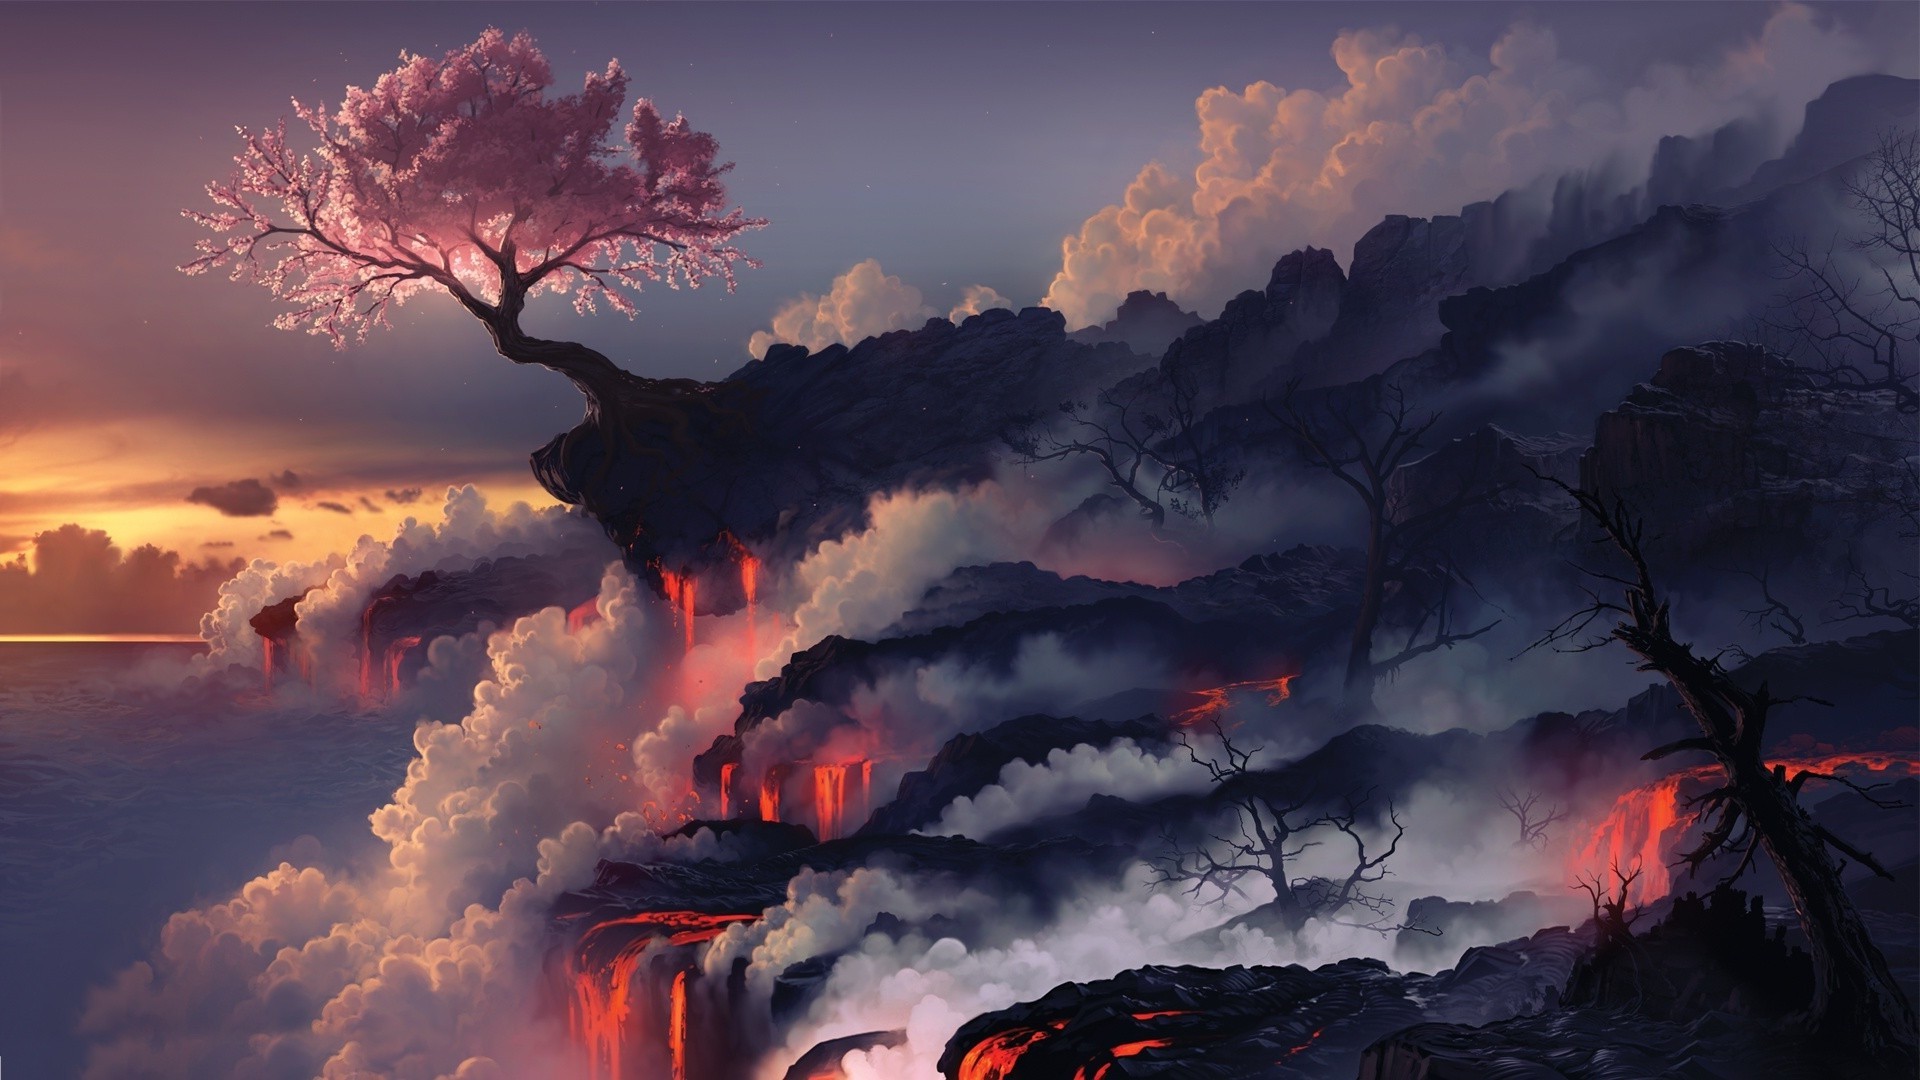 fantasy sunset dawn sky landscape evening silhouette nature dusk light outdoors mountain storm weather tree